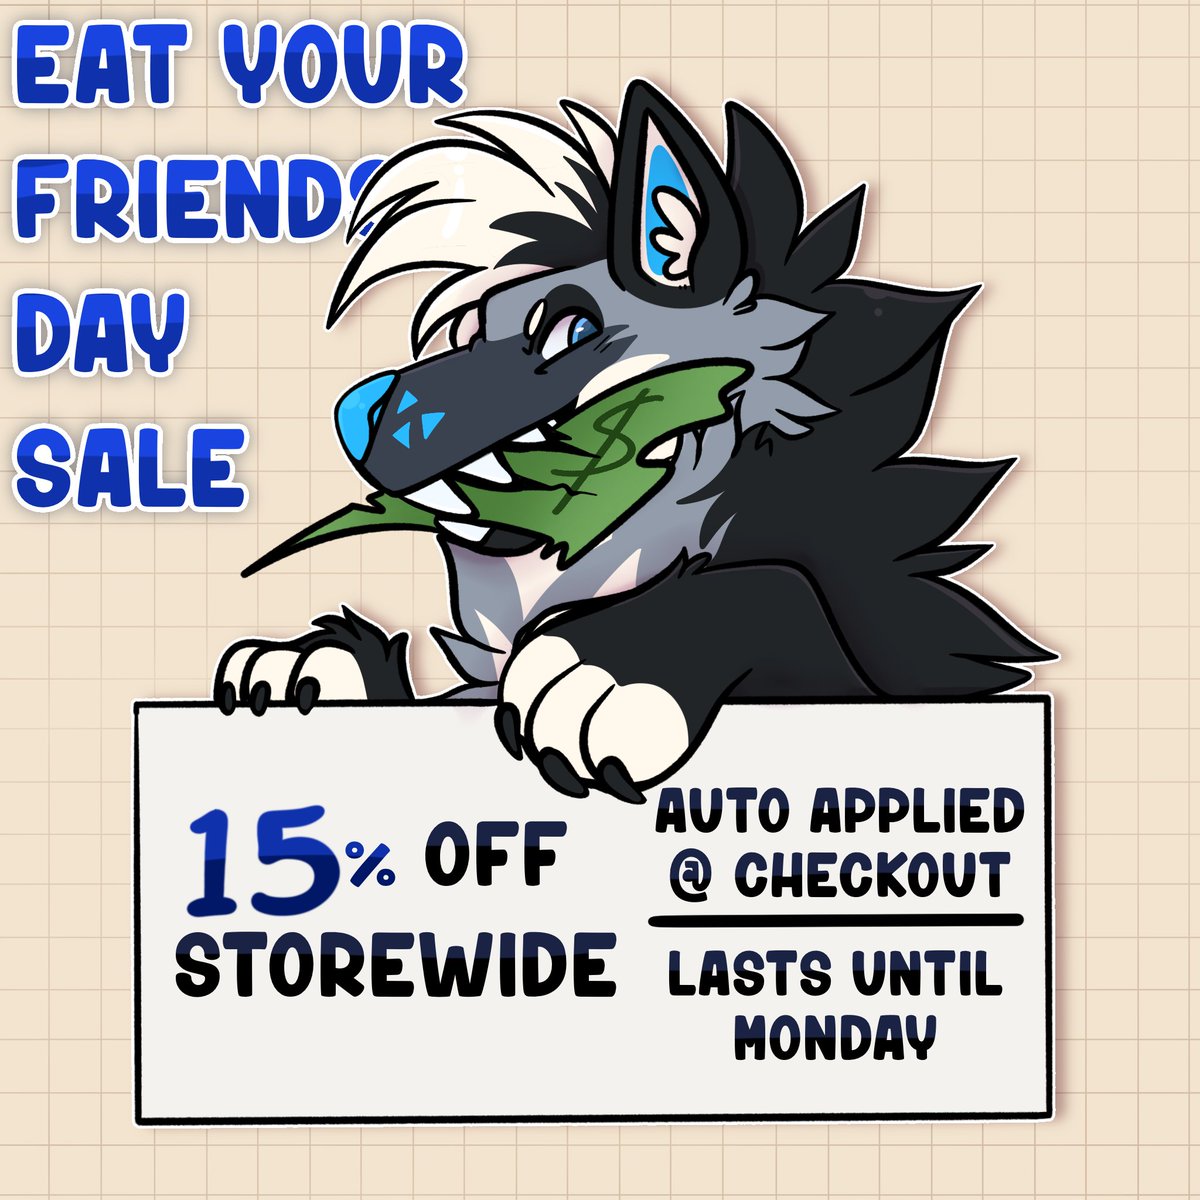 We're kicking off #EatYourFriendsDay a little early with a SALE!👀 Enjoy 15% off across our store (Ends Monday 29th) Discount is automatically added at checkout*